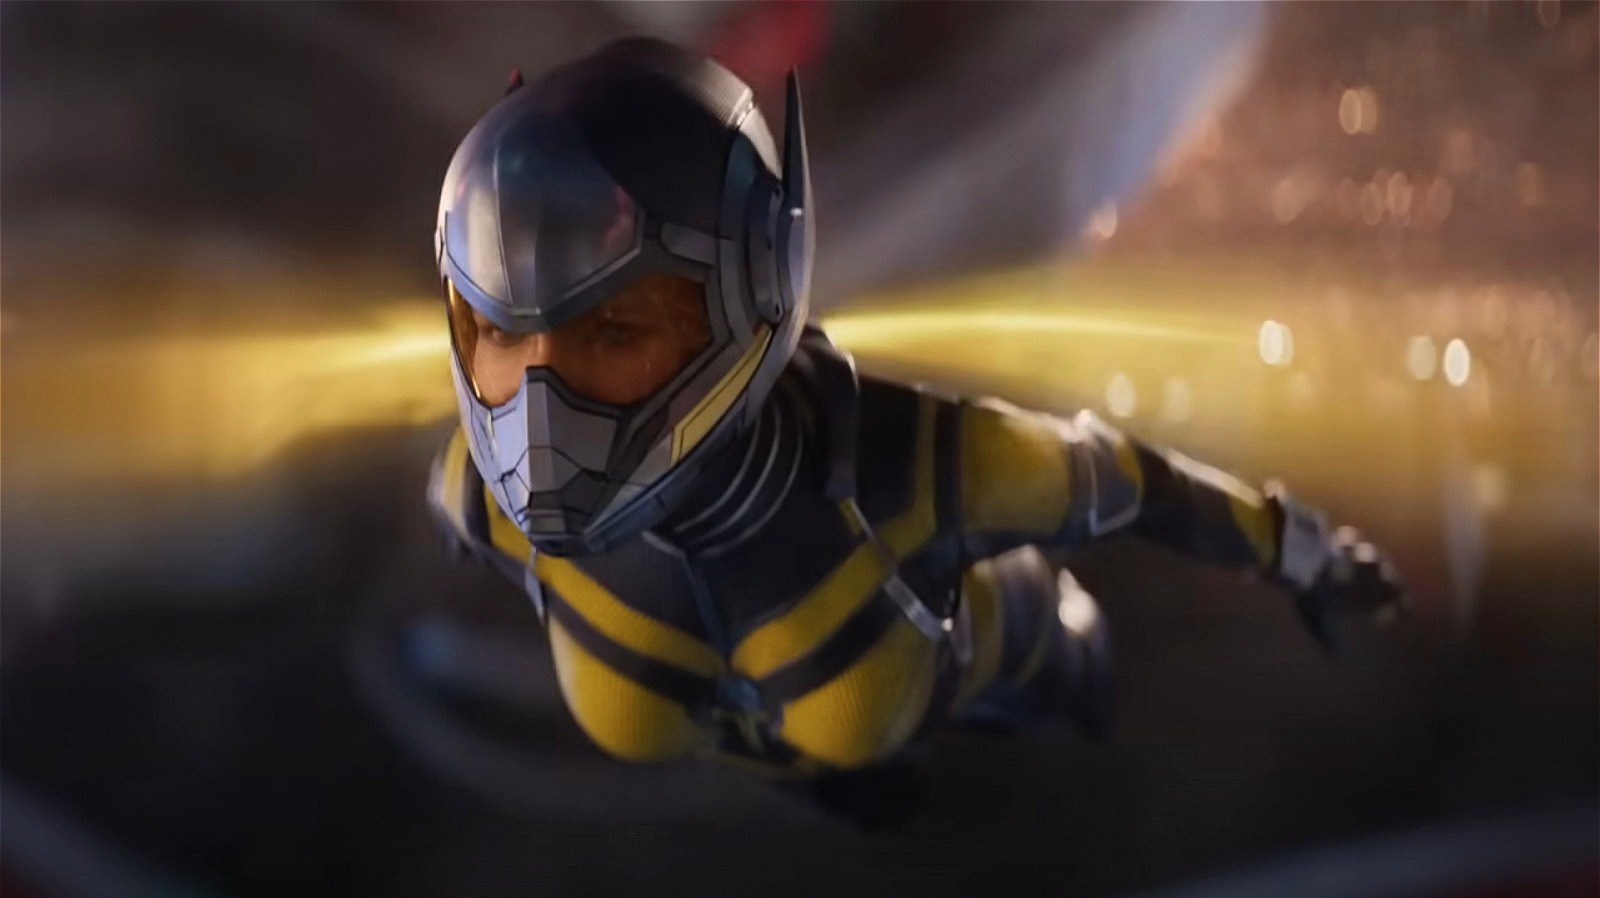 Ant-Man and the Wasp: Quantumania – What Can We Expect?